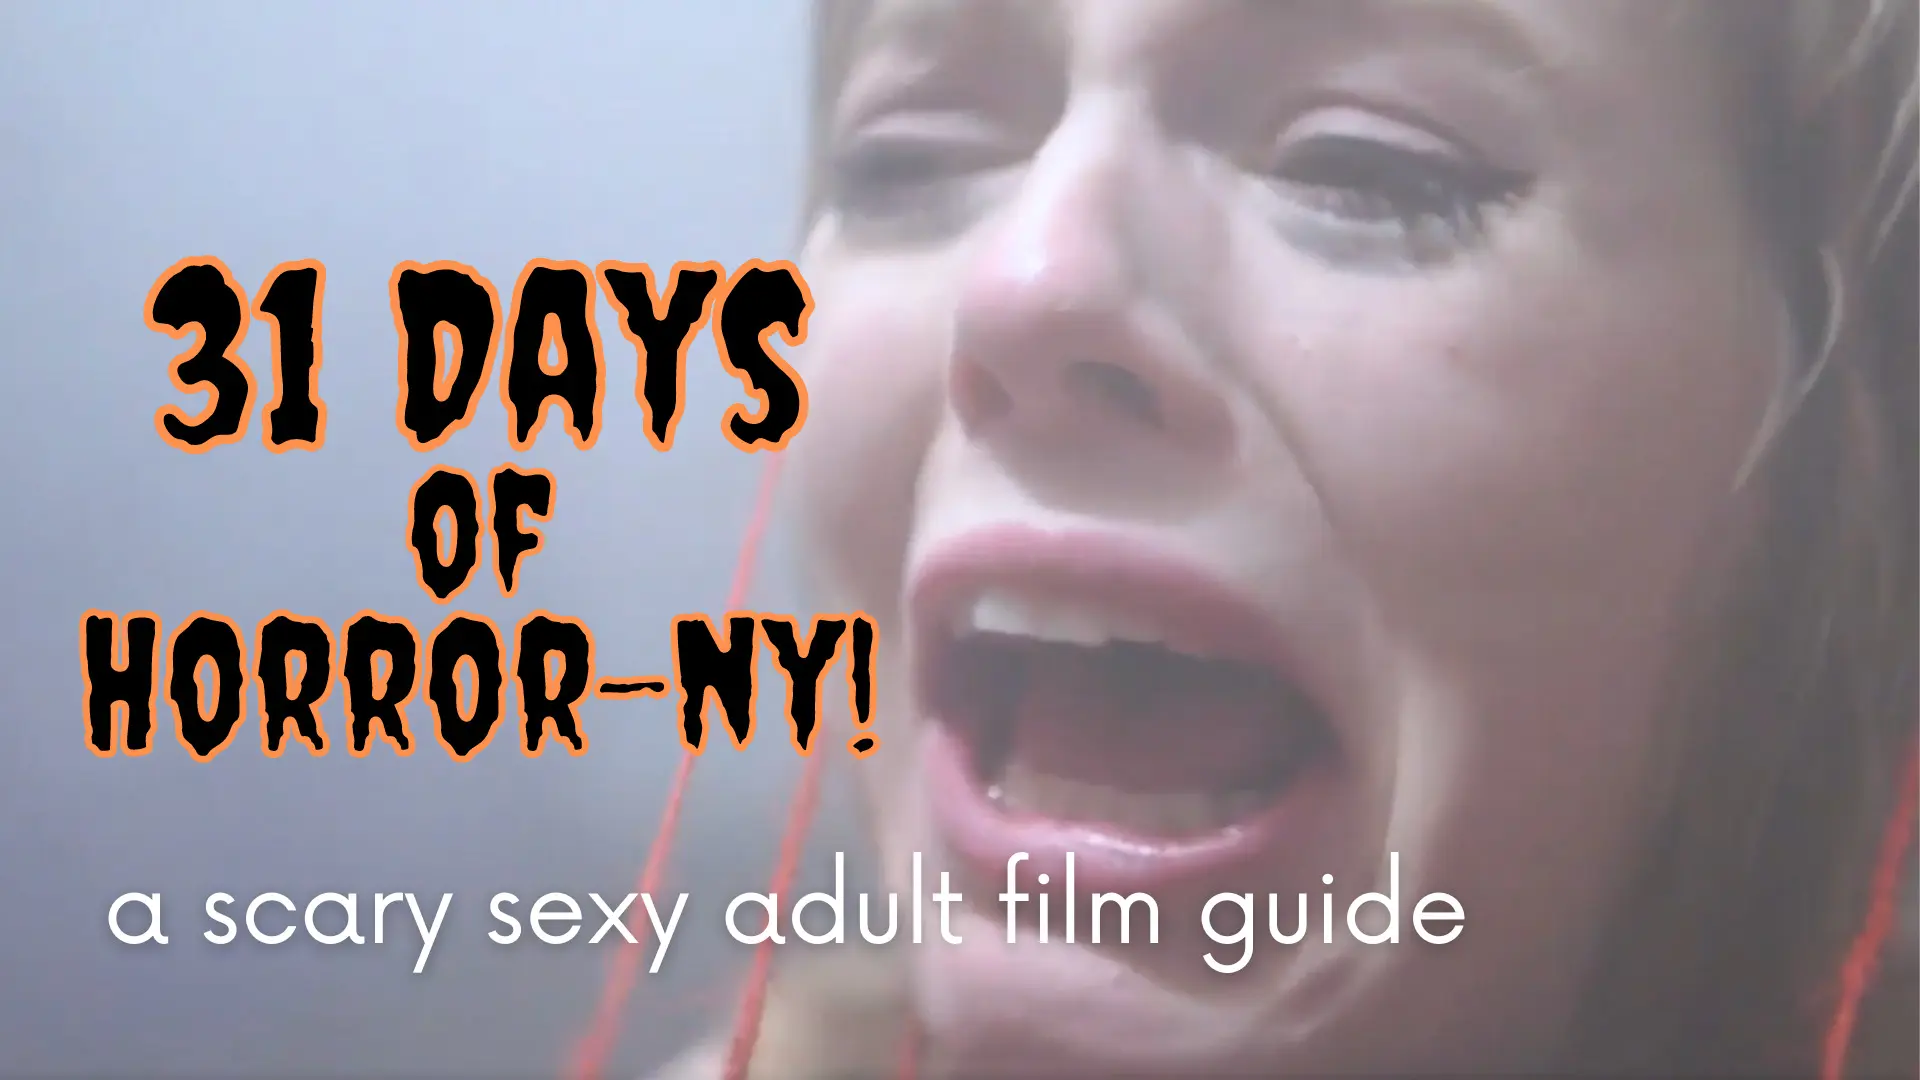 Secxy Films - 31 Days of Horror-ny! Scary Sexy Adult Films - PinkLabel.TV